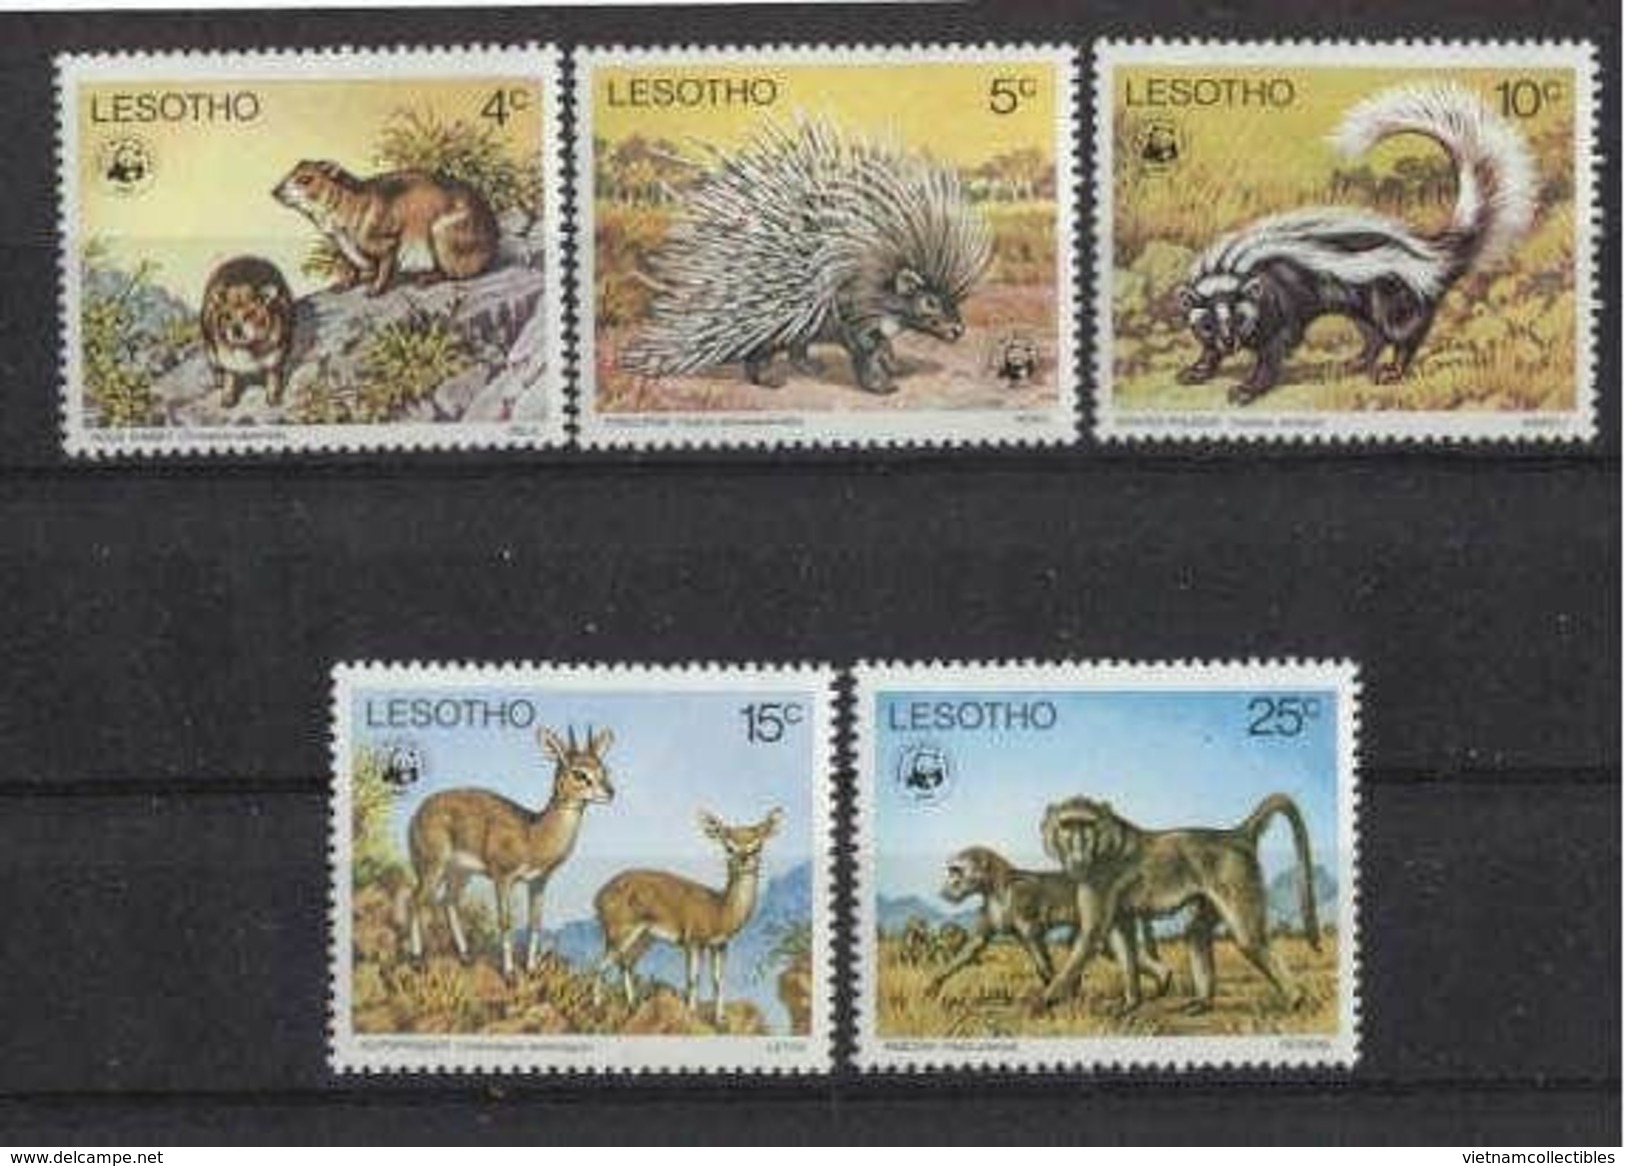 W06 WWF W.W.F. Lesotho MNH Perf Stamps 1977 : Rock Rabbits / Polecat / Endangered Species - Unused Stamps